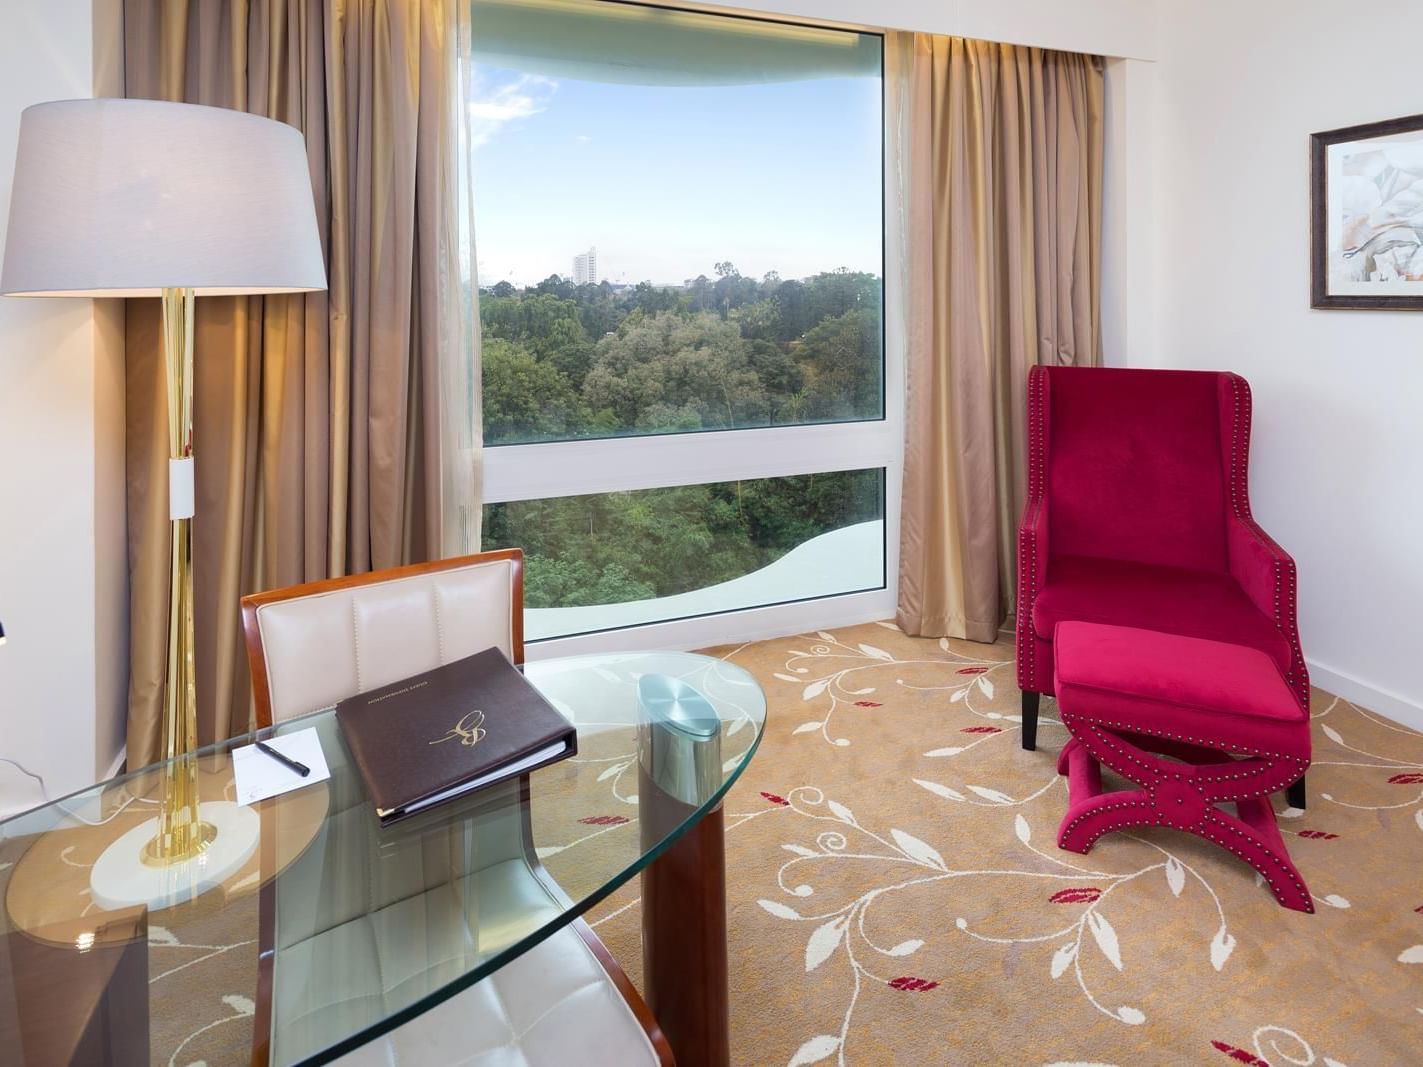 Premium City View King Room with Red chair and studying table rooms at Royal on the Park hotel